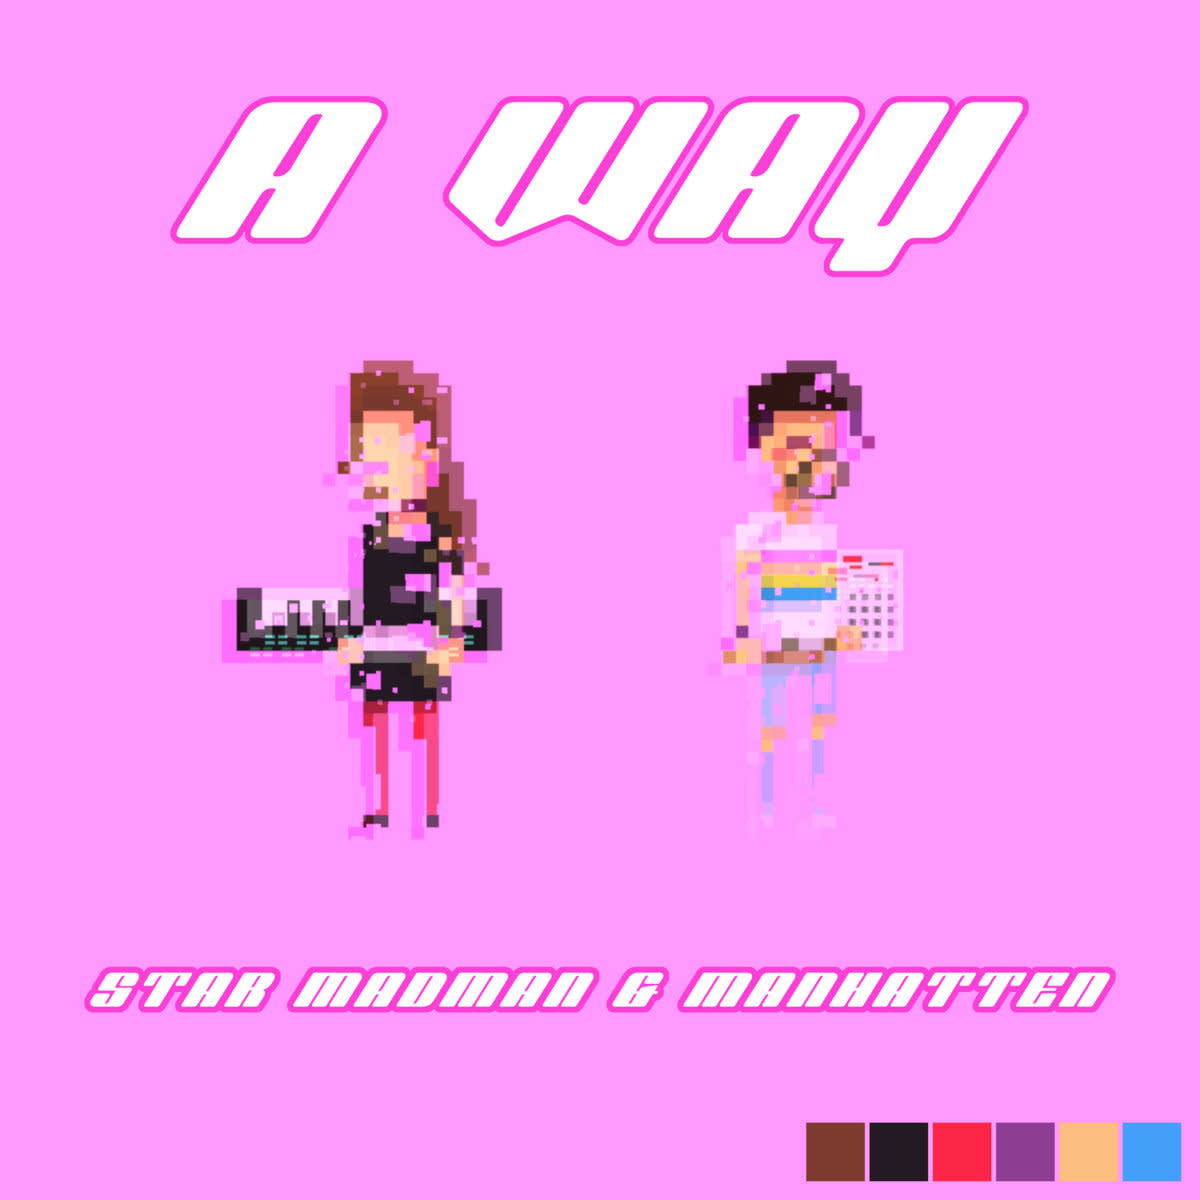 synth-single-review-a-way-by-manhatten-star-madman